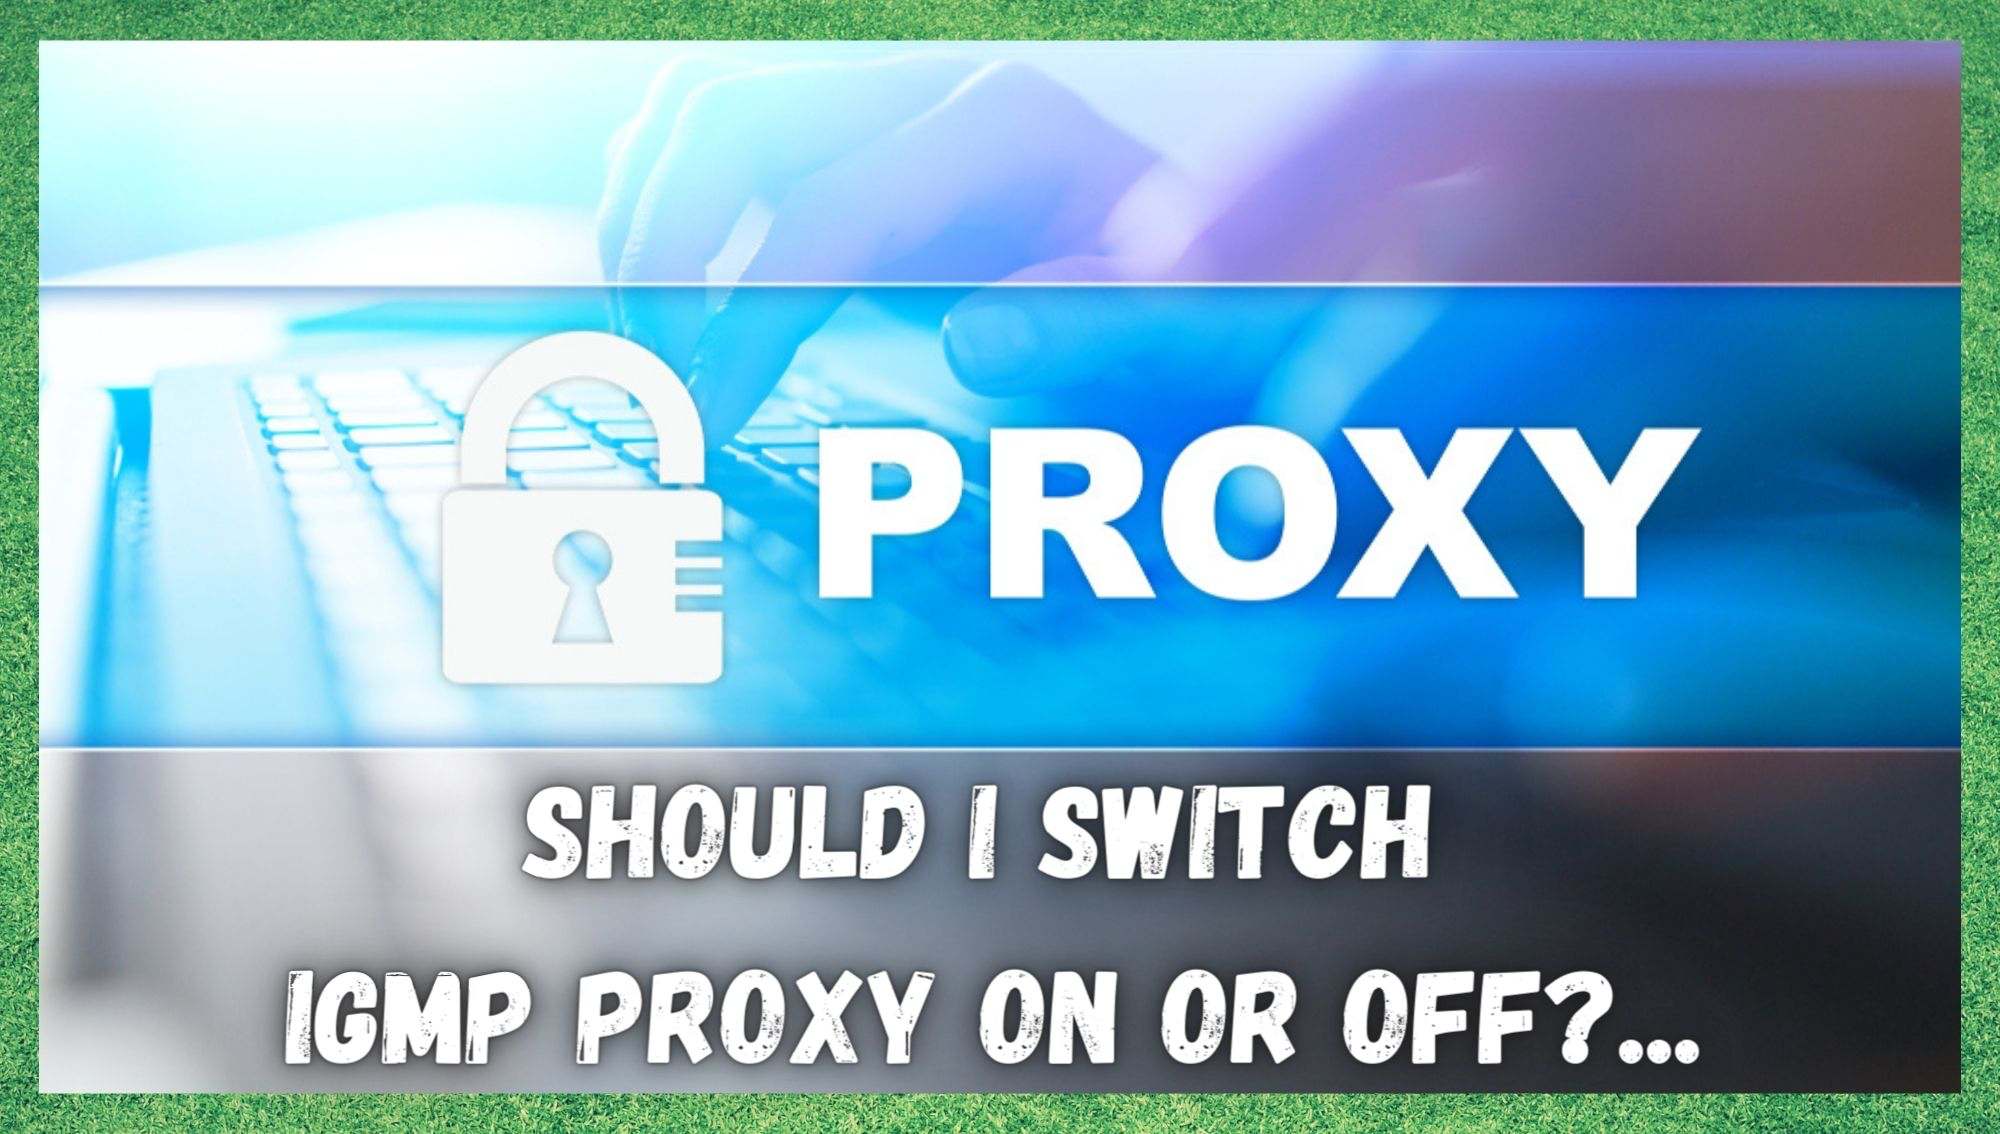 IGMP Proxy On or Off